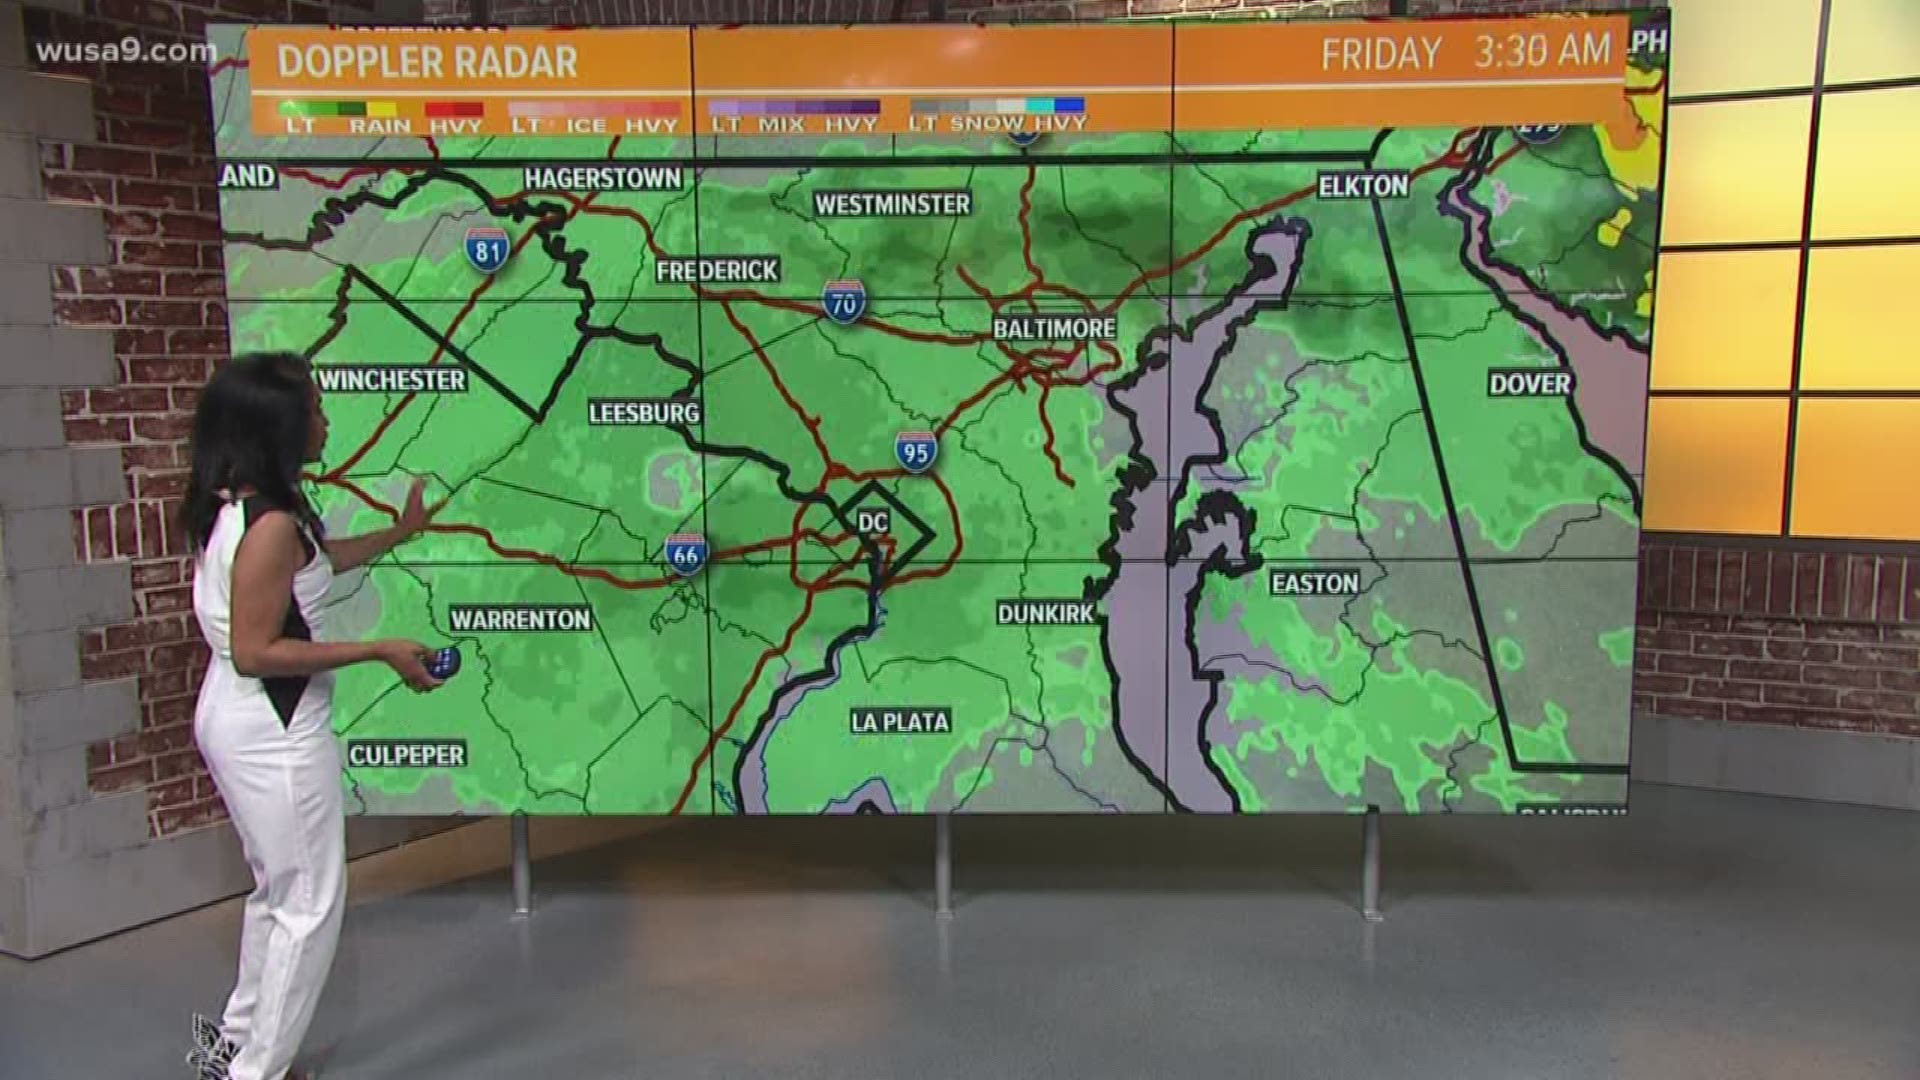 Showers and storms are in the forecast Friday. Here's the timeline:
Friday  5 a.m. - 12 p.m. - Cloudy with scattered showers/storms.  

Friday Noon. - 7p.m. - Showers and storms, some strong/severe with heavy rain, damaging winds and even an isolated tornado.

Friday Night:  Showers pulling away, windy and colder.